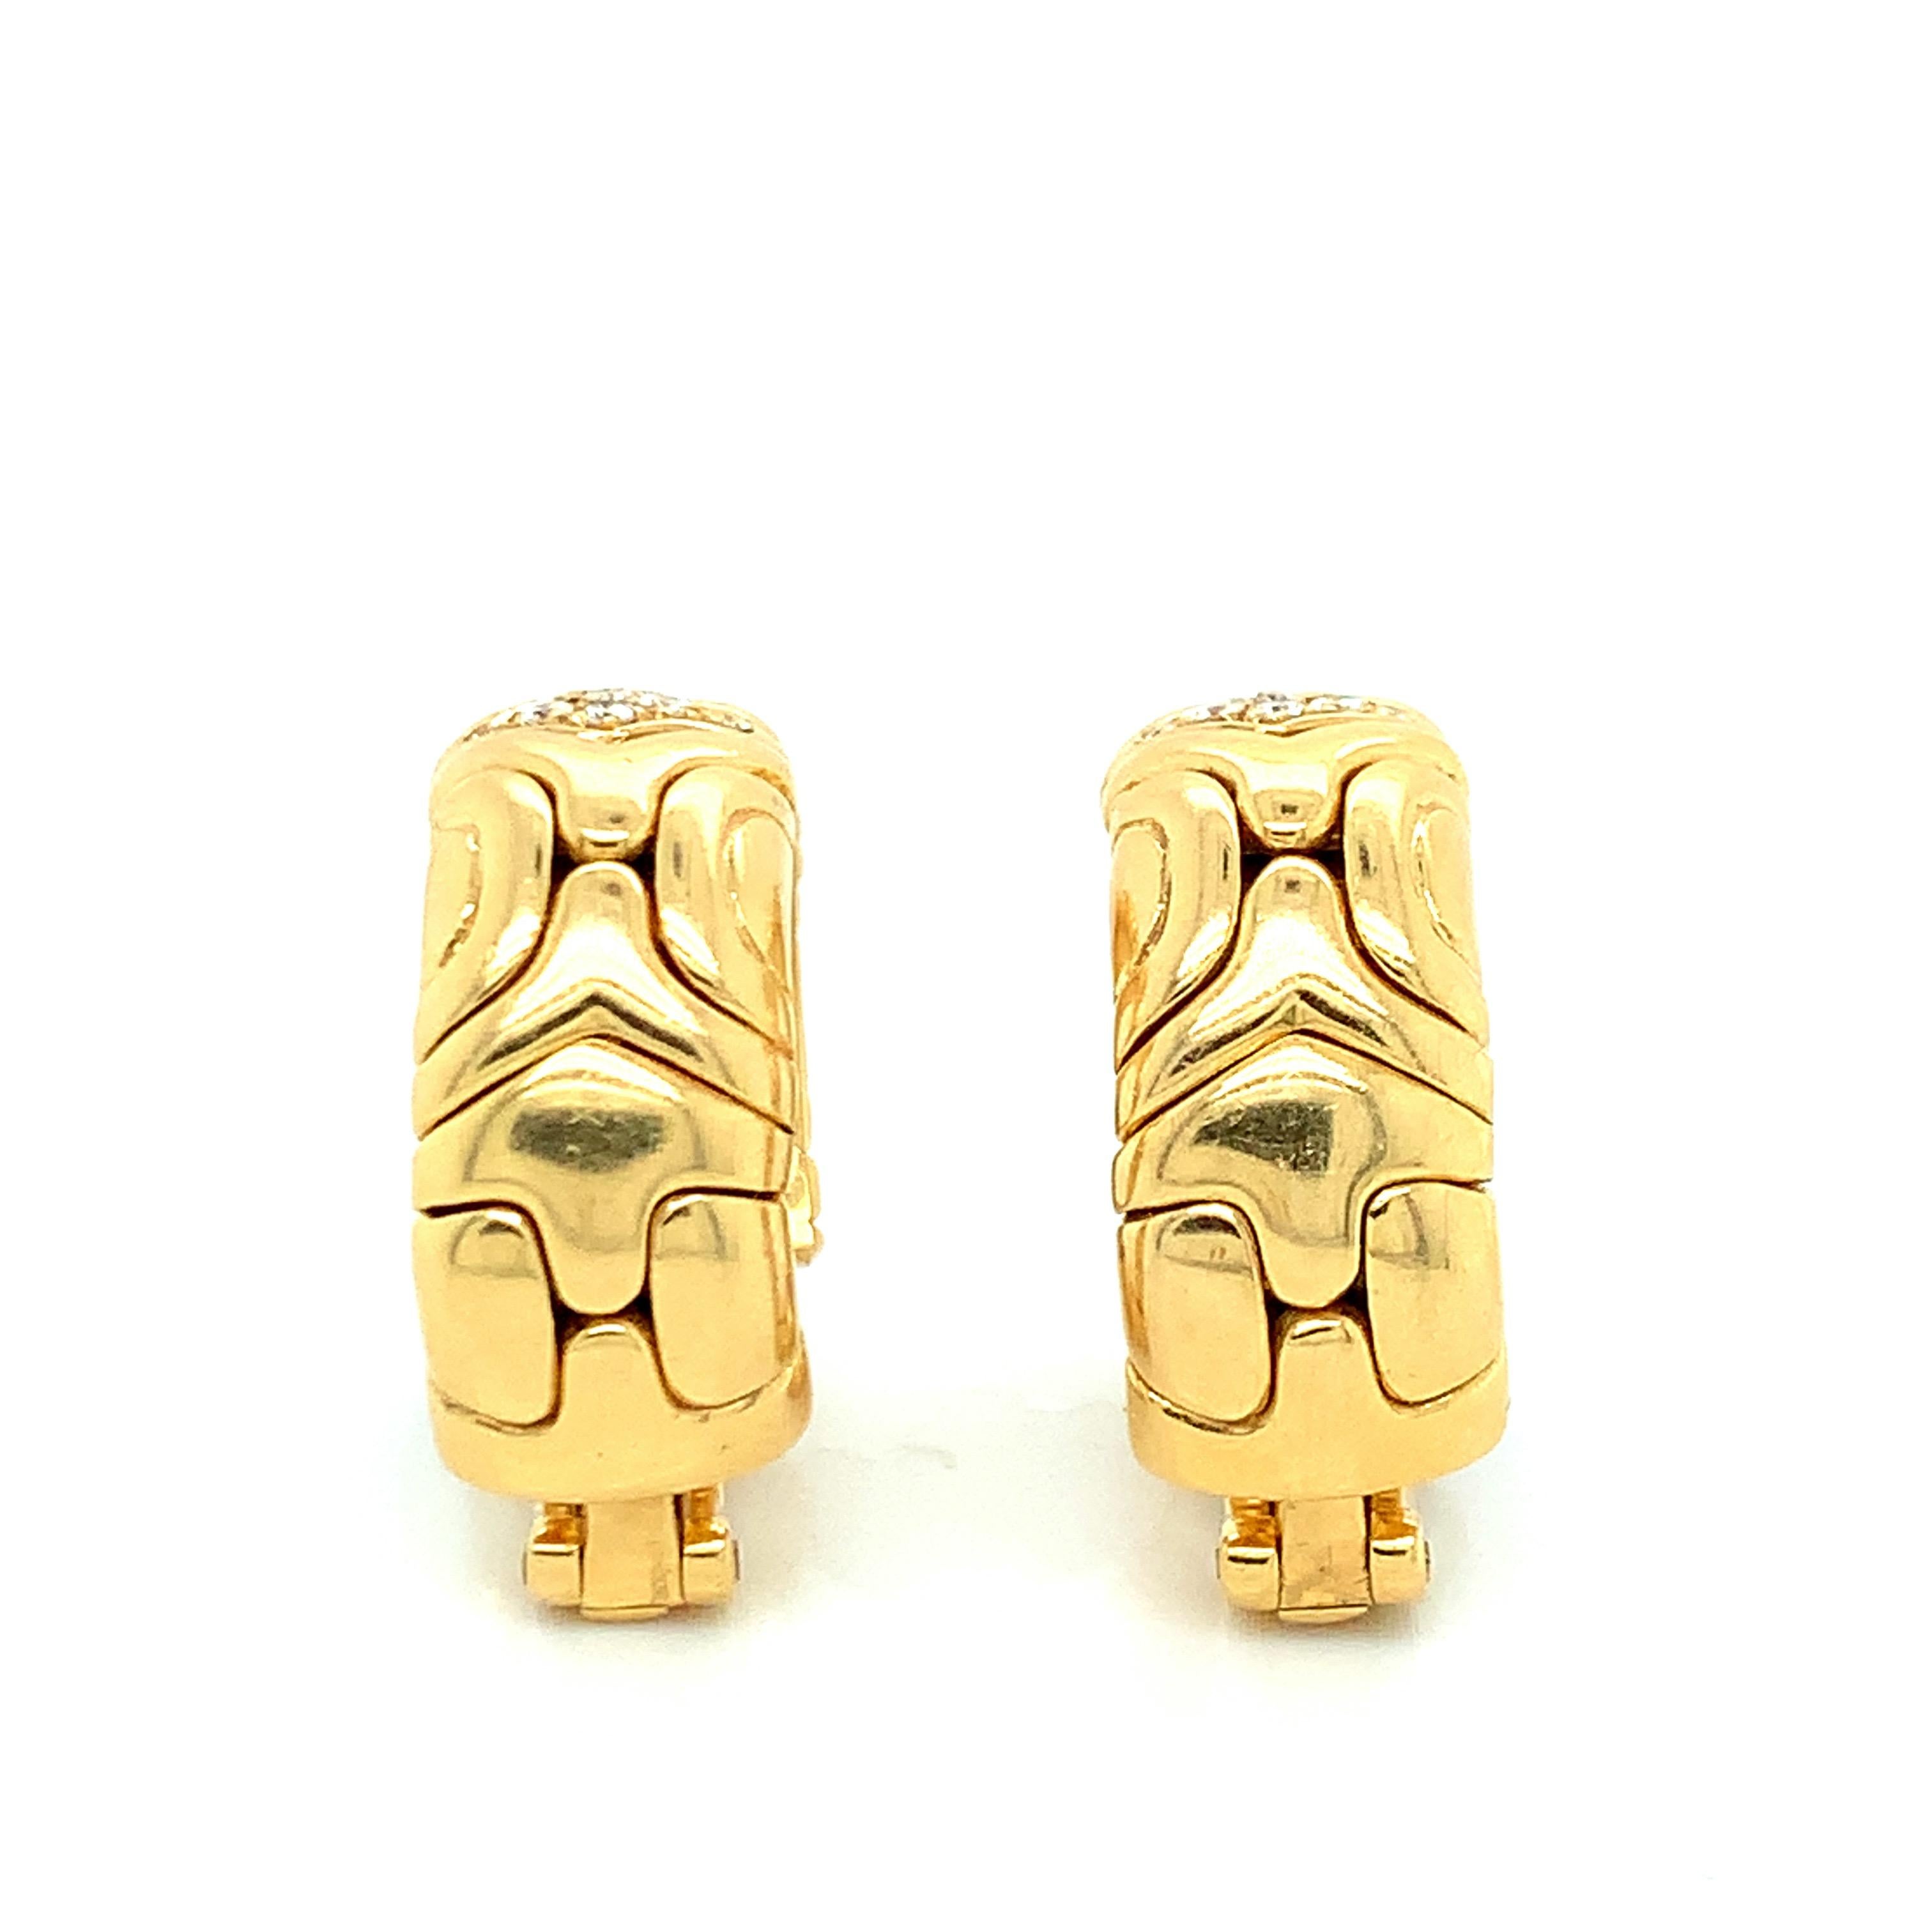 Bvlgari 18 karat yellow gold ear clips from the iconic Parentesi collection. Marked Bvlgari. Total weight: 30.8 grams. Width: 2.2 cm. Length: 2.3 cm. 